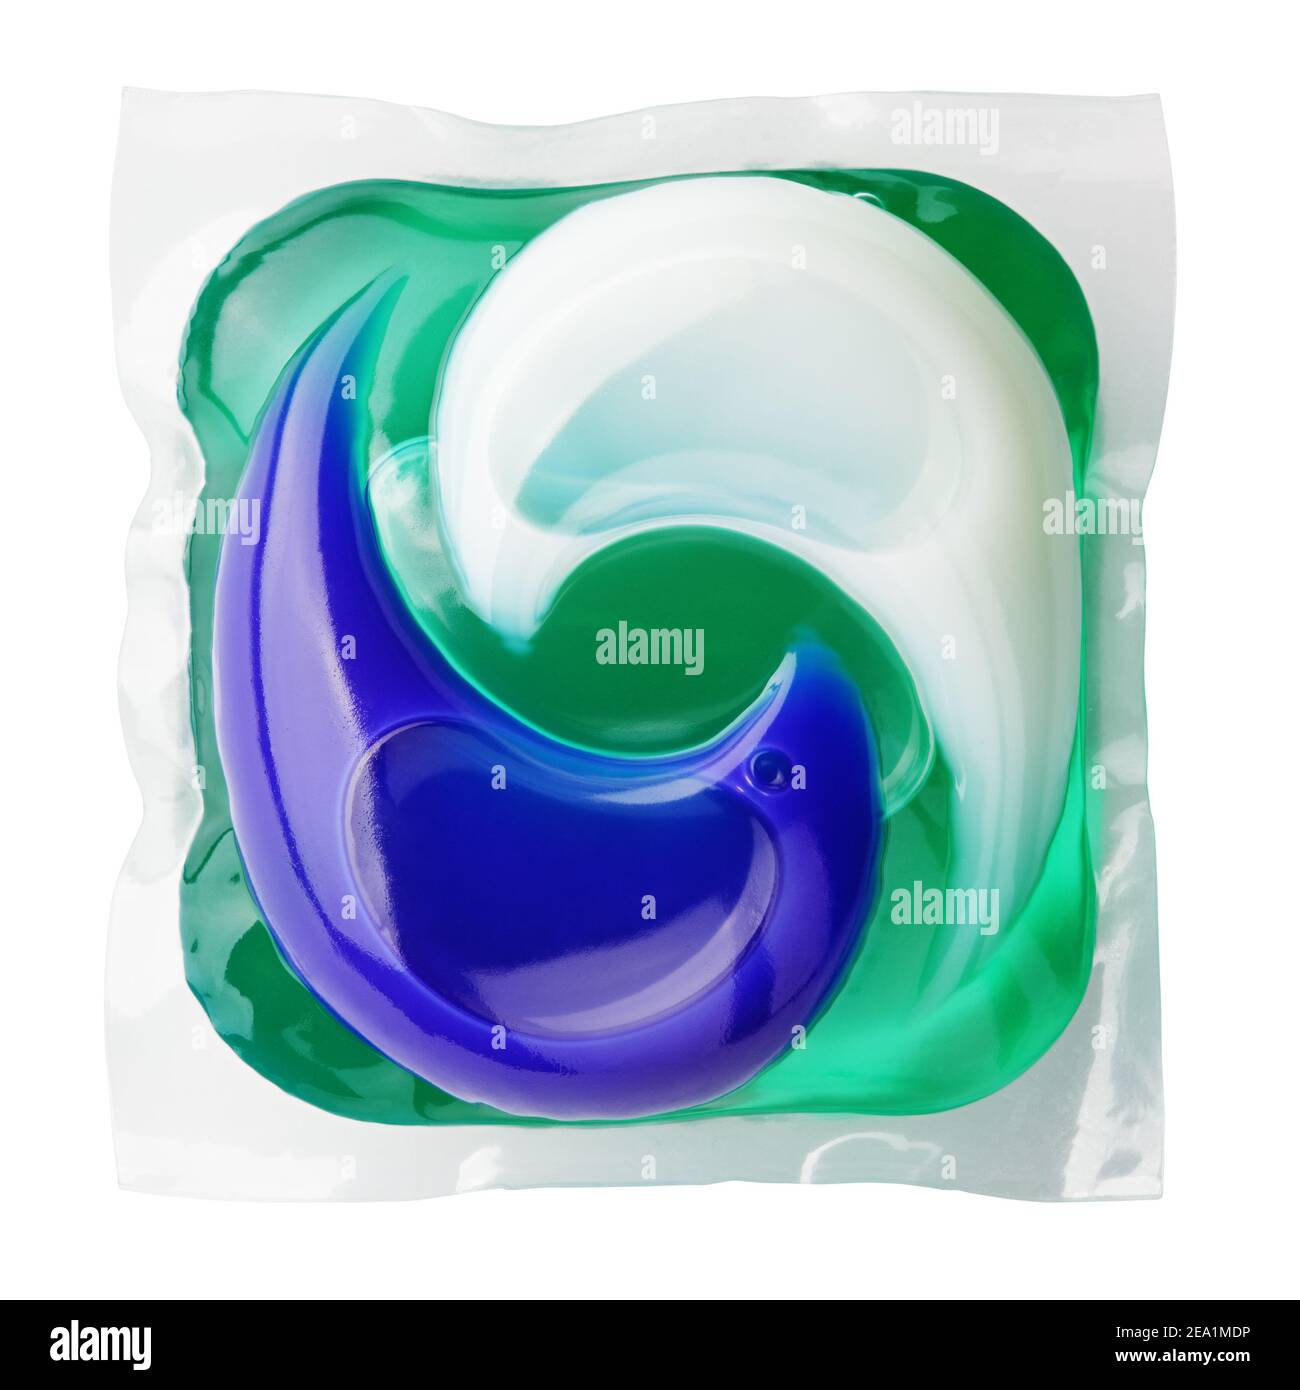 Washing gel capsule pod with laundry detergent isolated on white background with clipping path Stock Photo